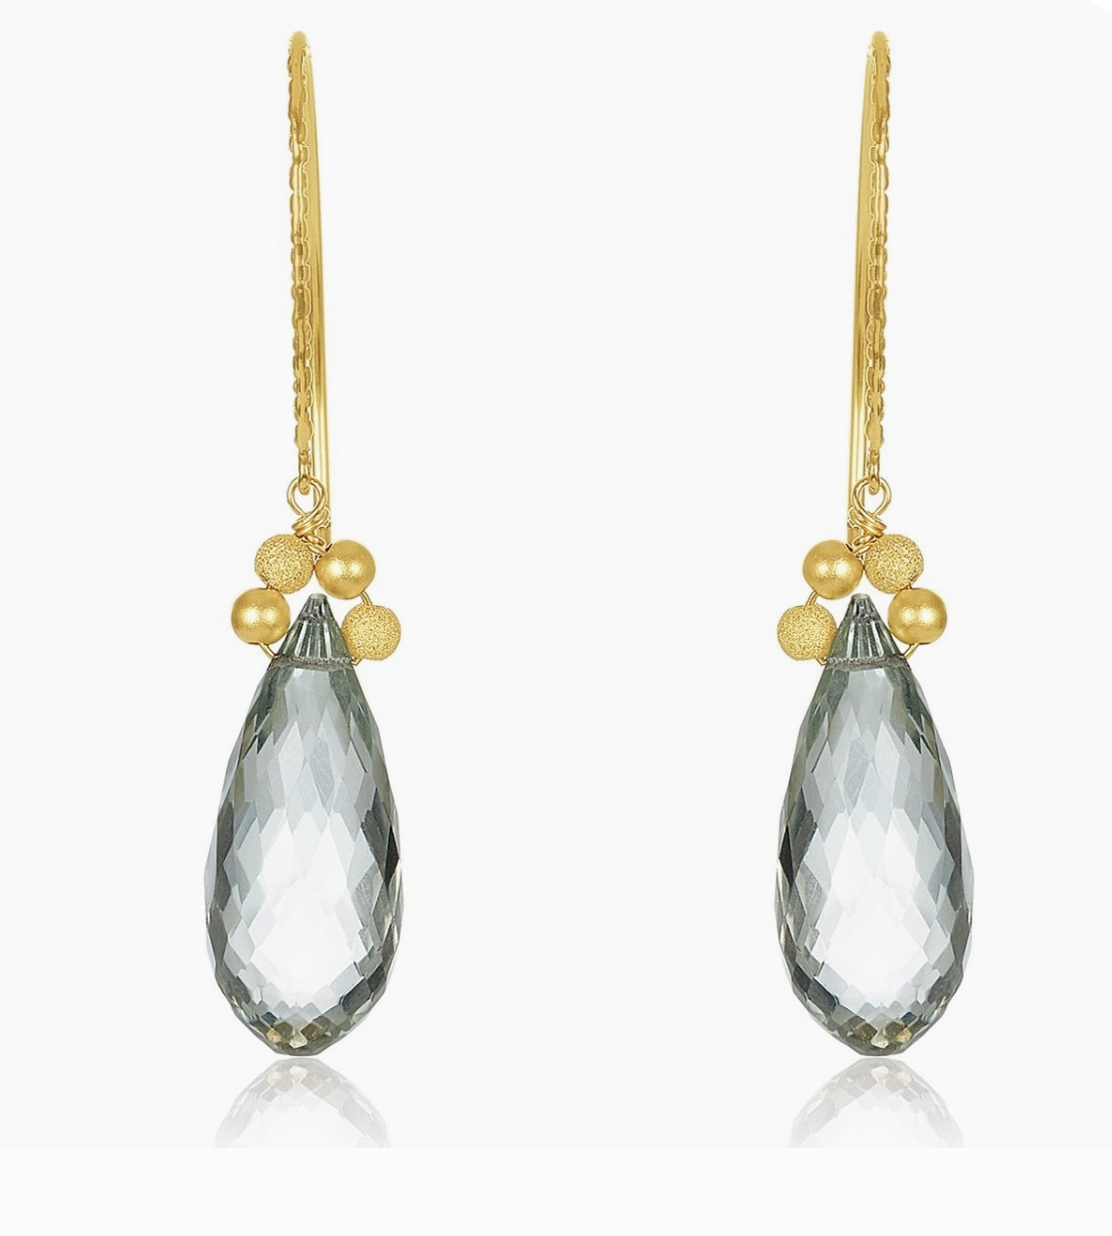 Long Island with Green Amethyst Earrings, Gold-Filled